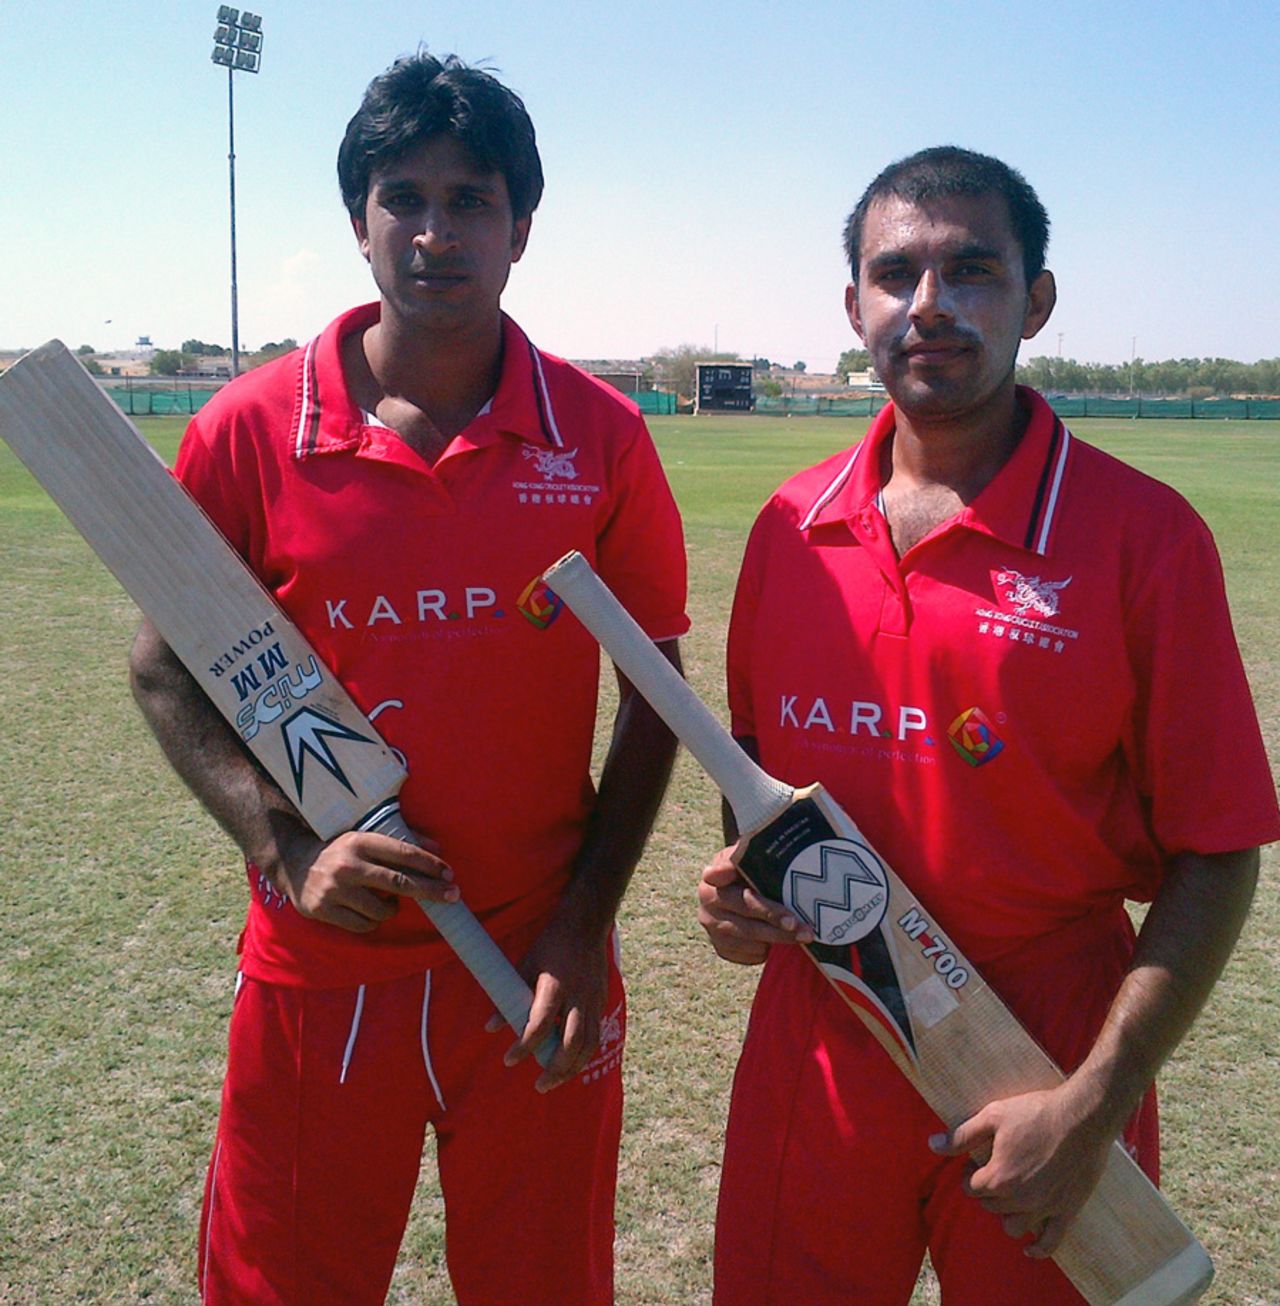 Tanwir Afzal and Mudassar Hussain shared a 142-run partnership against Oman in the 5th place play-off match for the ACC Trophy Elite 2012 played at Al Dhaid Cricket Village on 10th October 2012